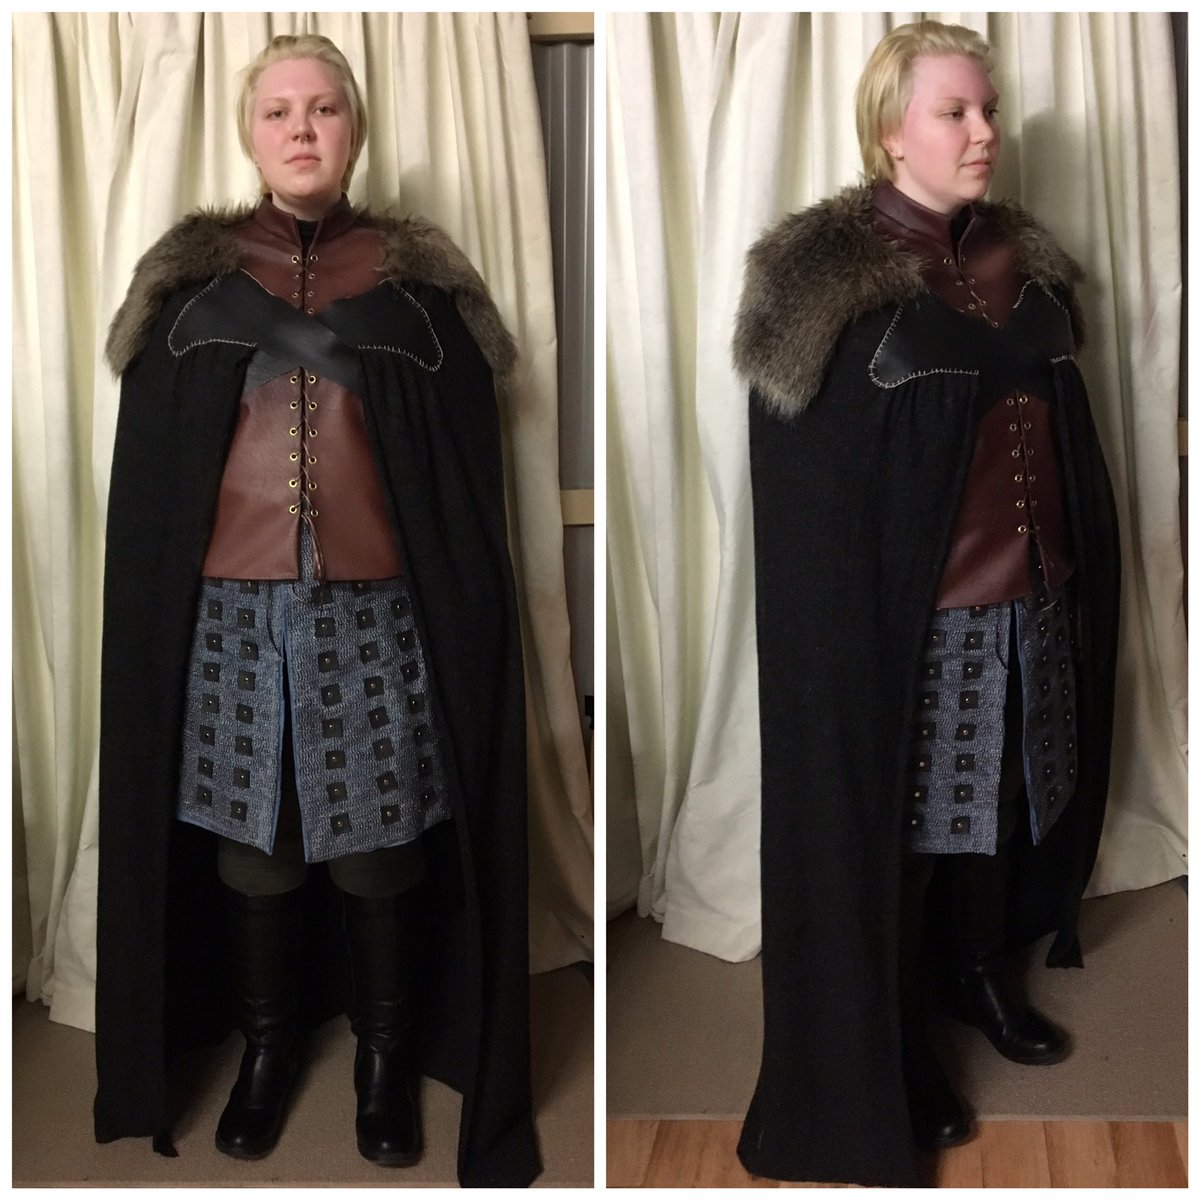 I’m so excited to show off my handmade Brienne of Tarth #cosplay this weekend at @SupanovaExpo in Perth!

I dyed my real (naturally very dark) hair for this! 

I’m only 5’11” so not quite the real height of @lovegwendoline but still tall enough I reckon ☺️

#GameOfThones